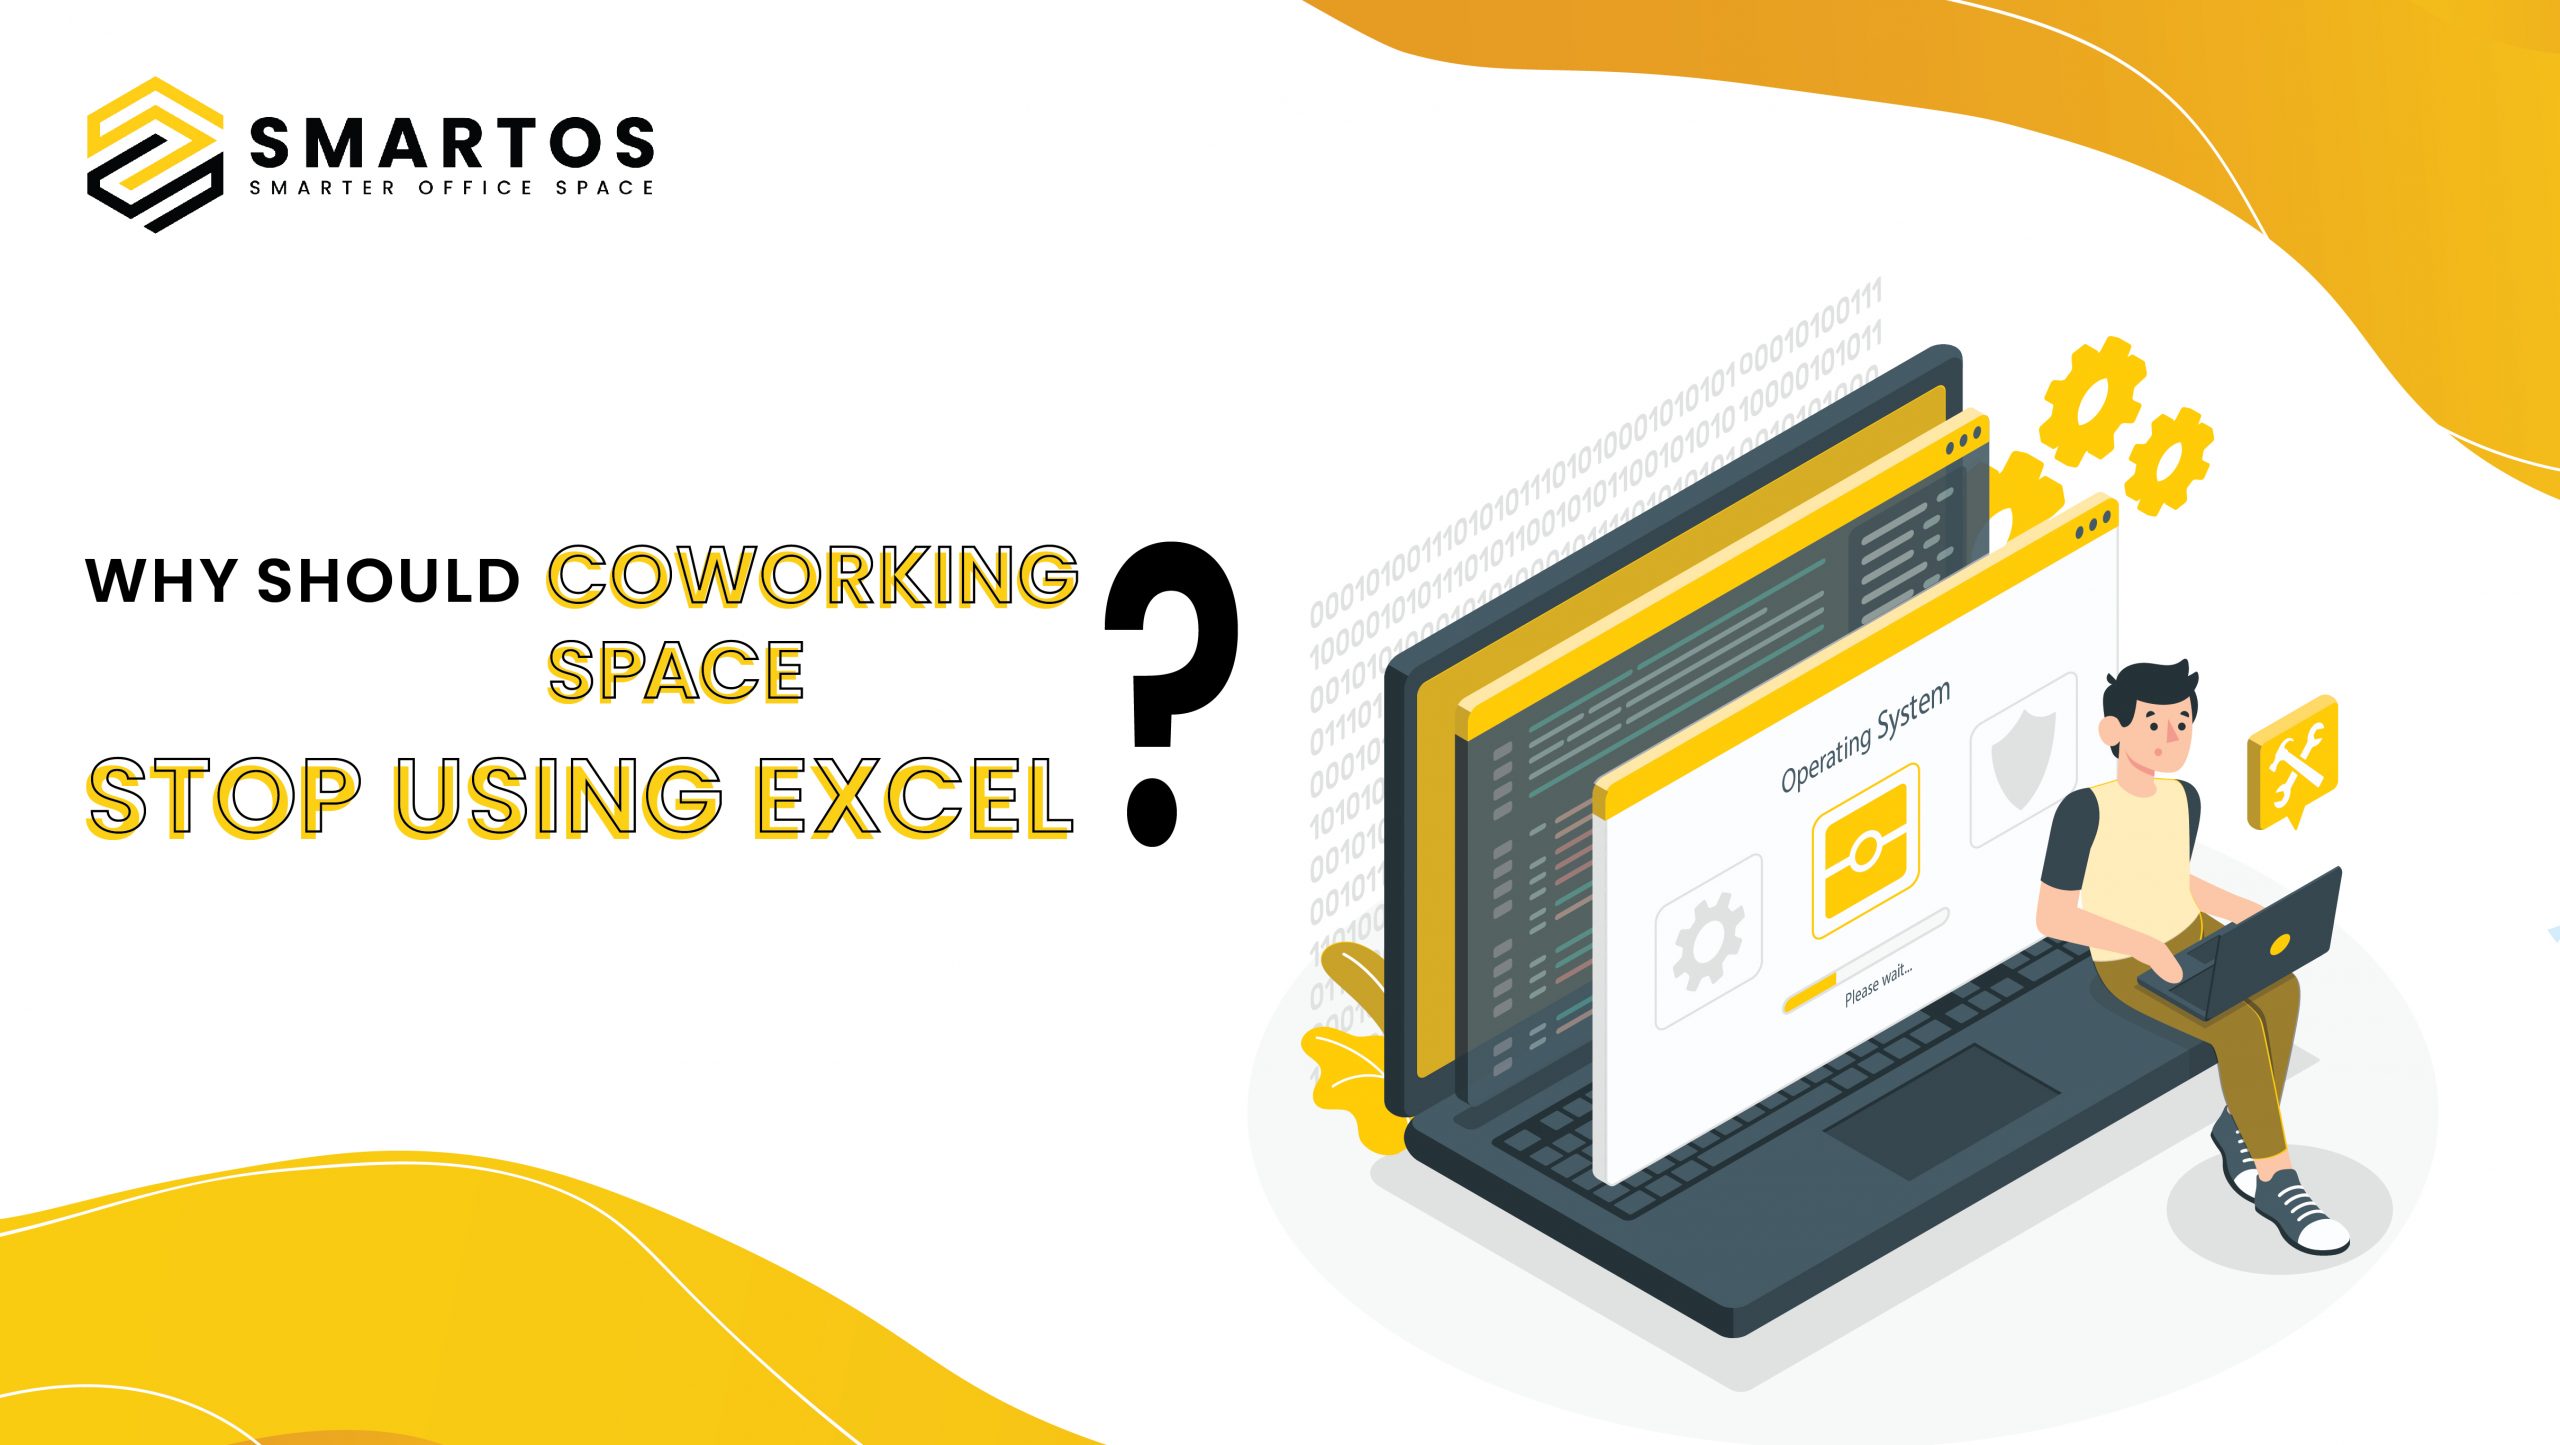 Why should Coworking Space Stop Using Excel?